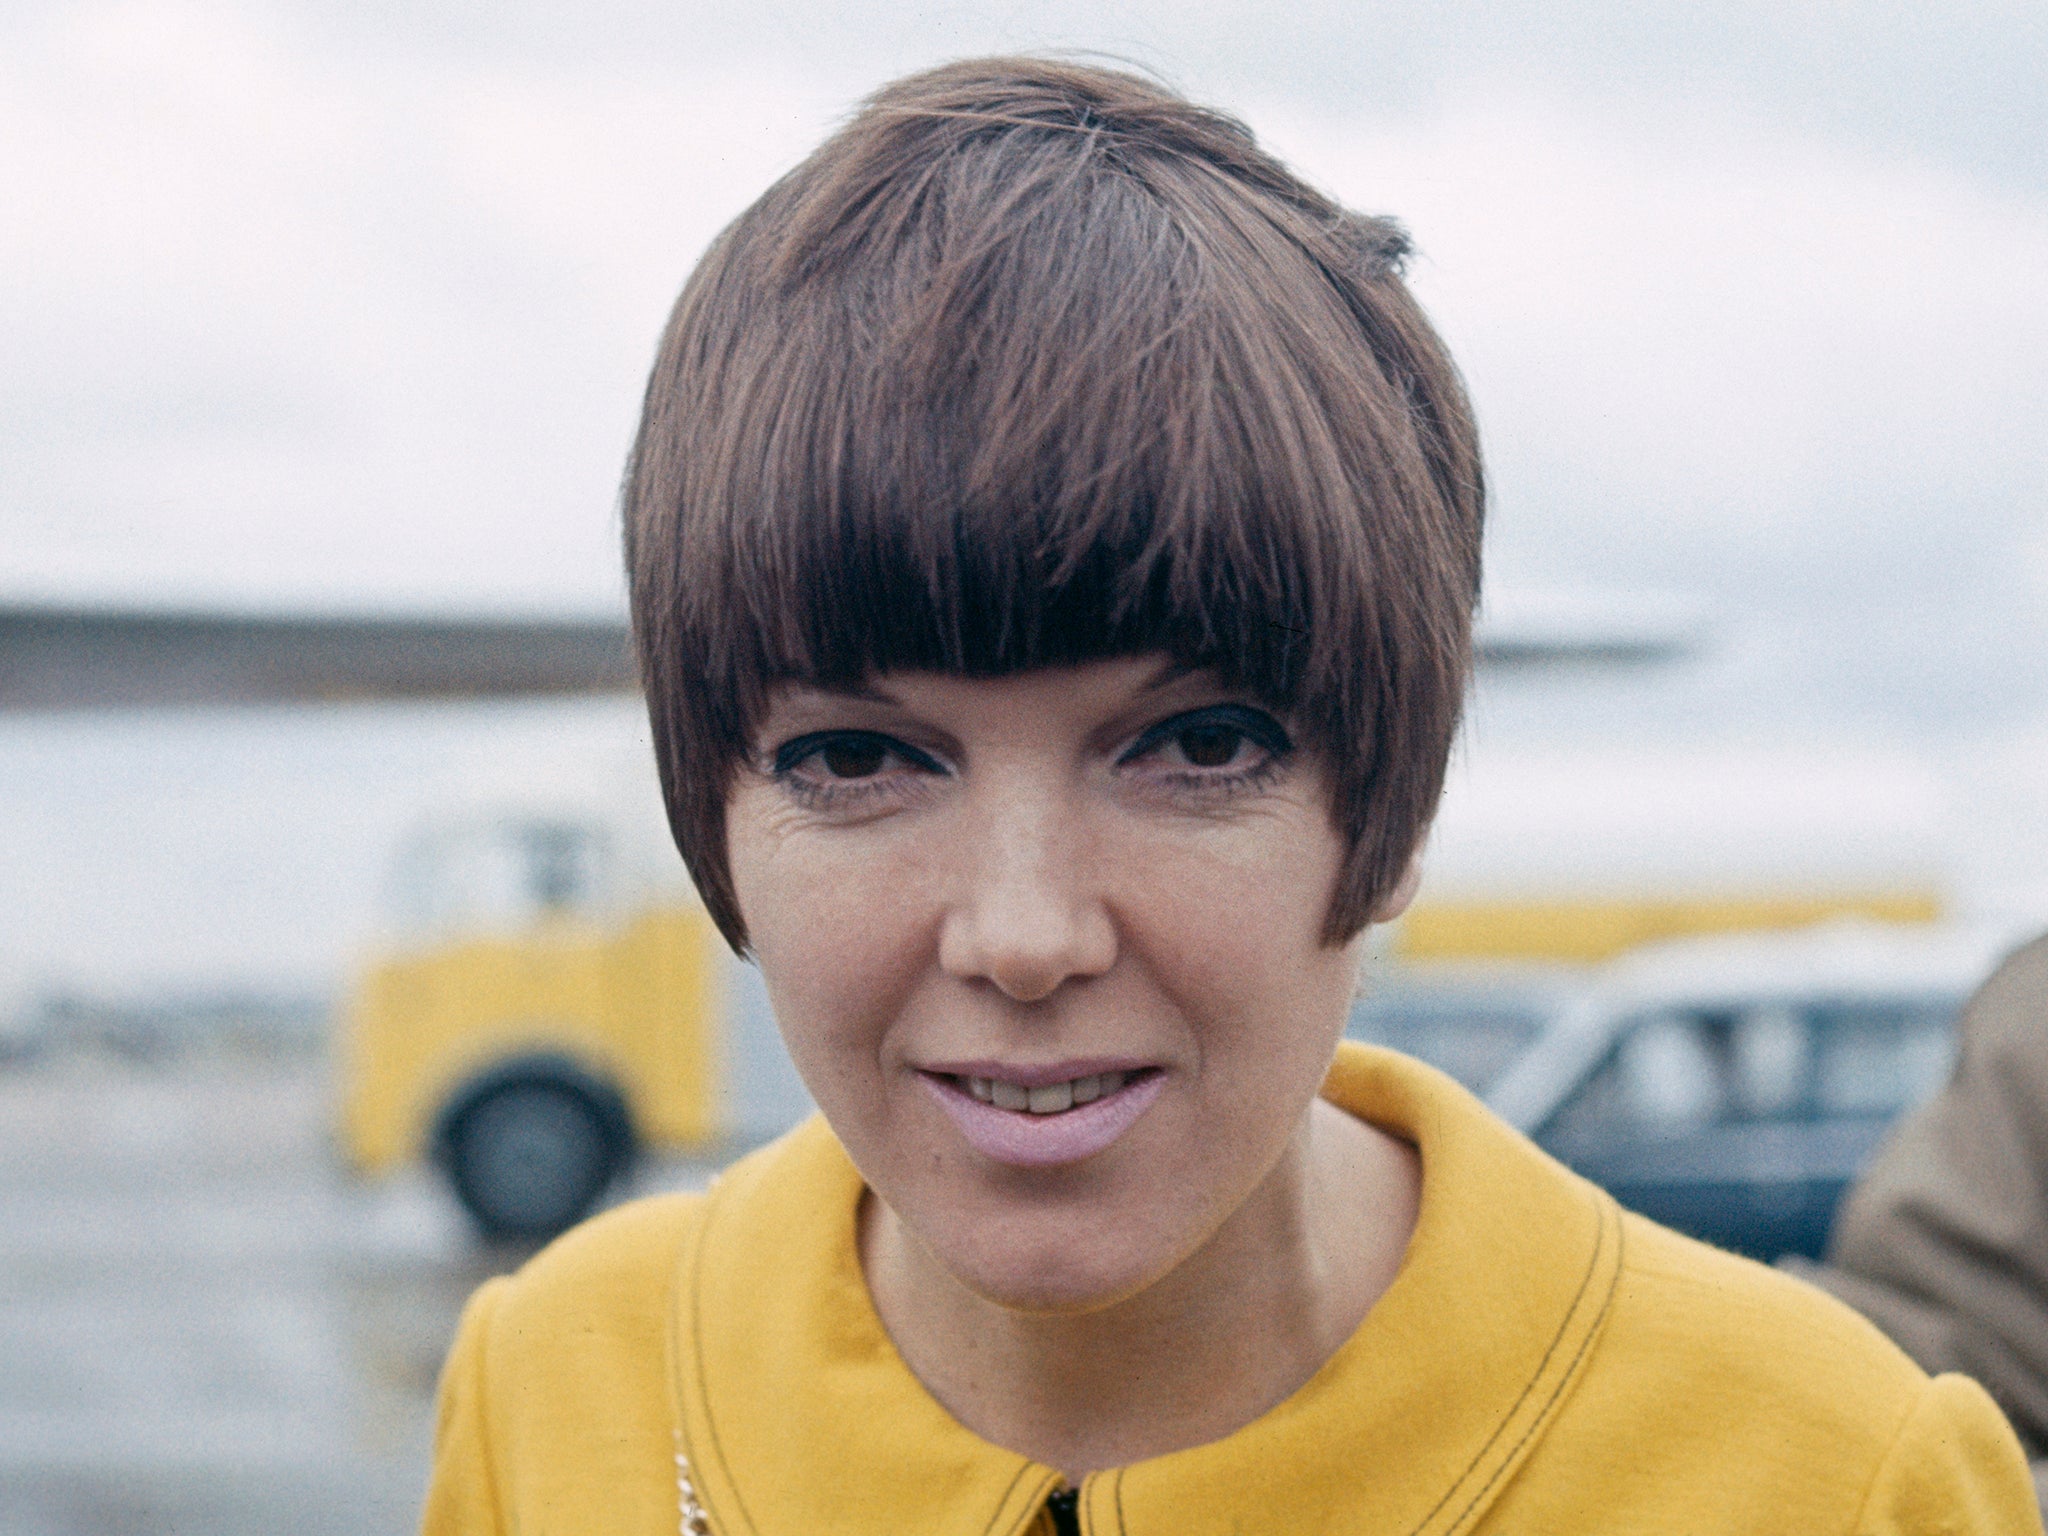 Quant pictured at an airport in London in 1967